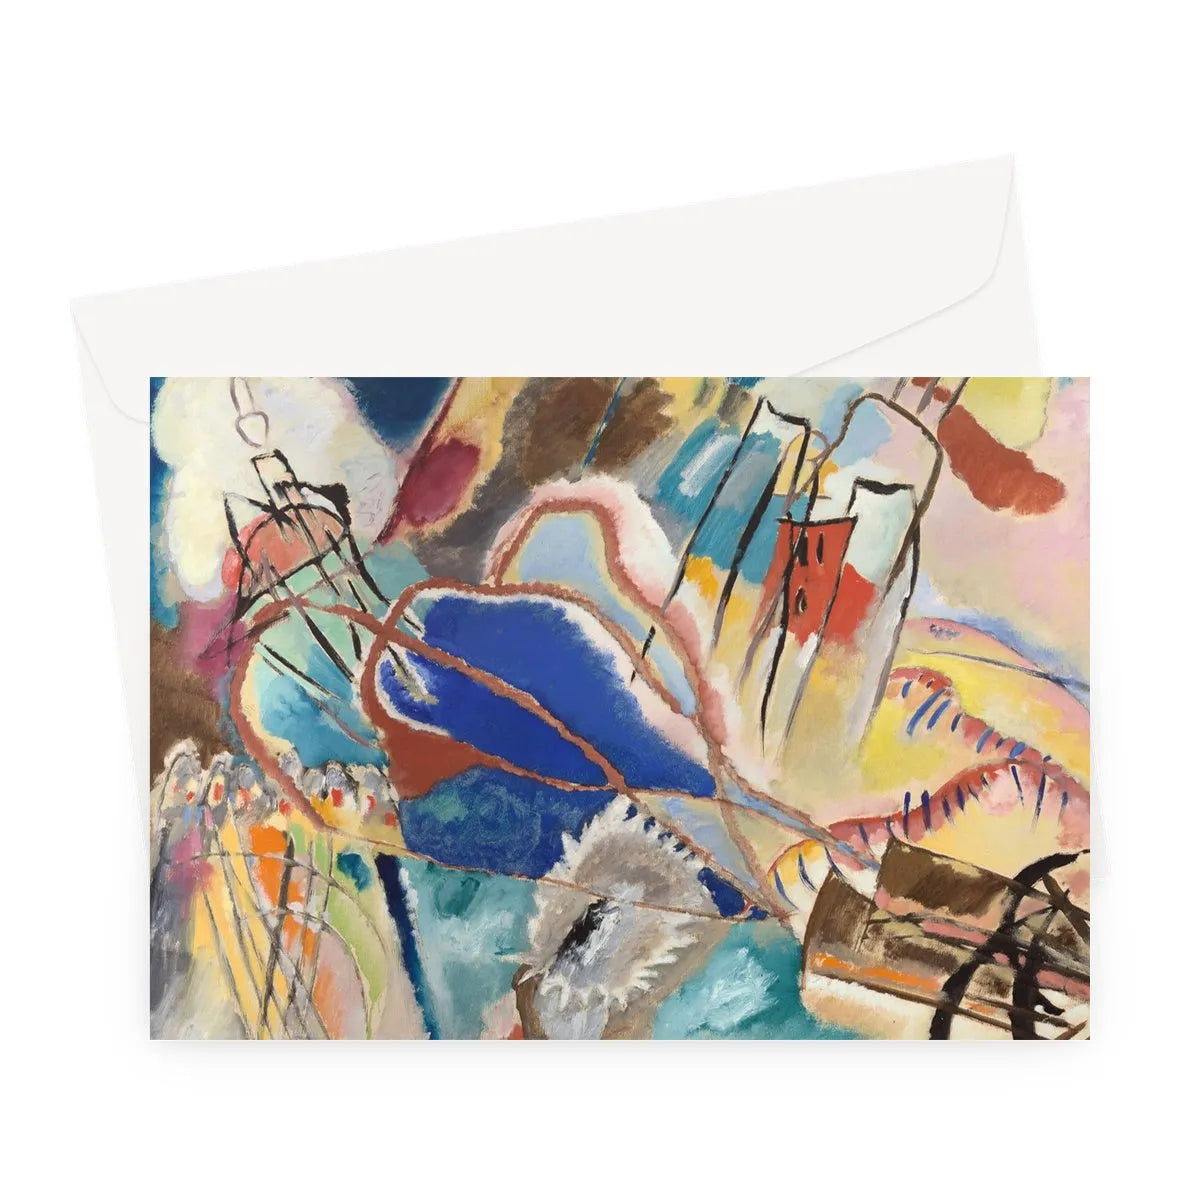 Improvisation No. 30 (cannons) By Vasily Kandinsky Greeting Card - A5 Landscape / 1 Card - Greeting & Note Cards